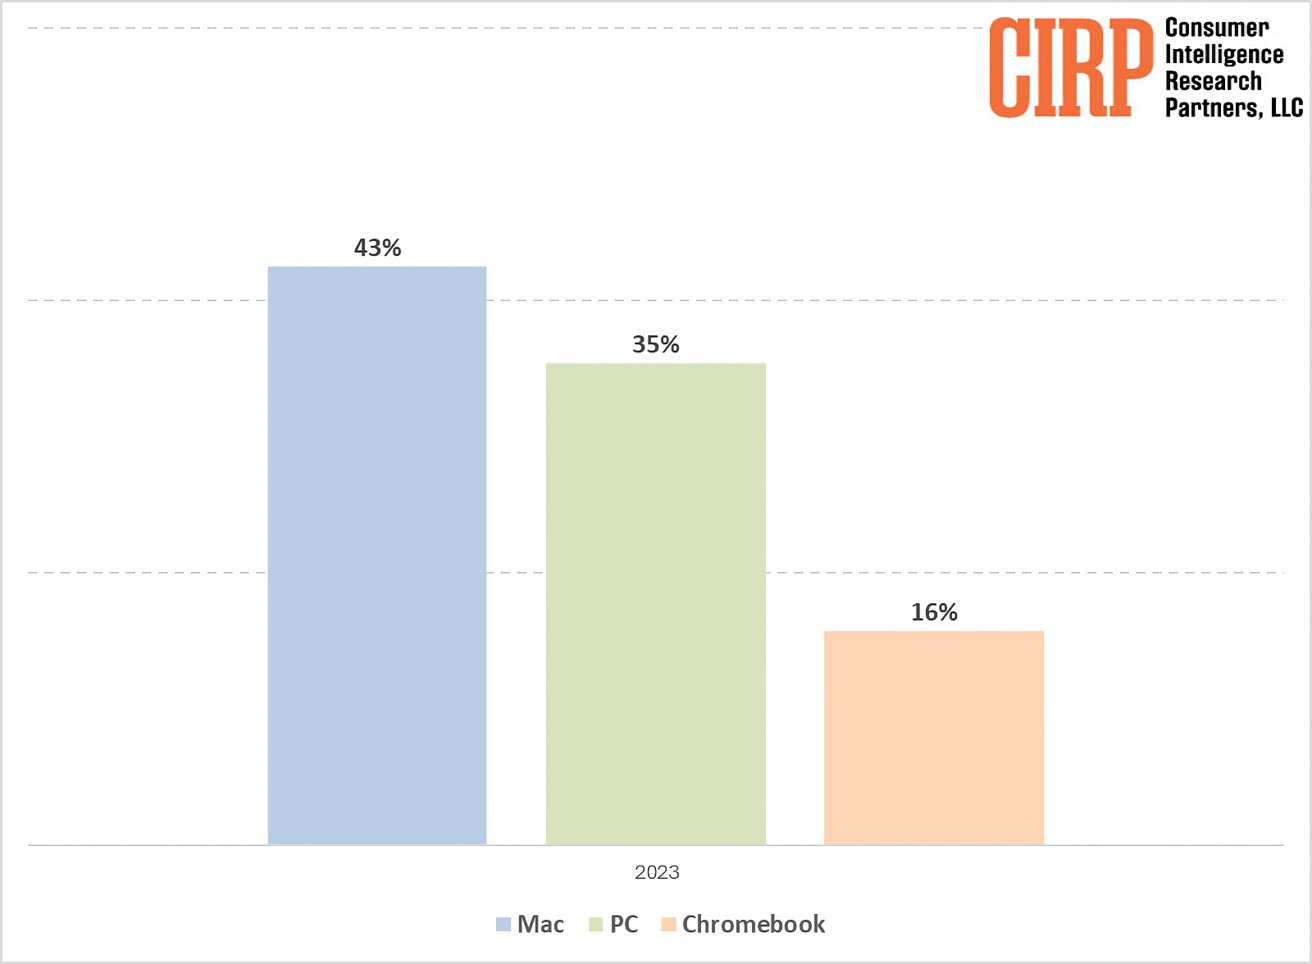 Bar chart comparing Mac (43%), PC (35%), and Chromebook (16%) market share percentages for 2023.